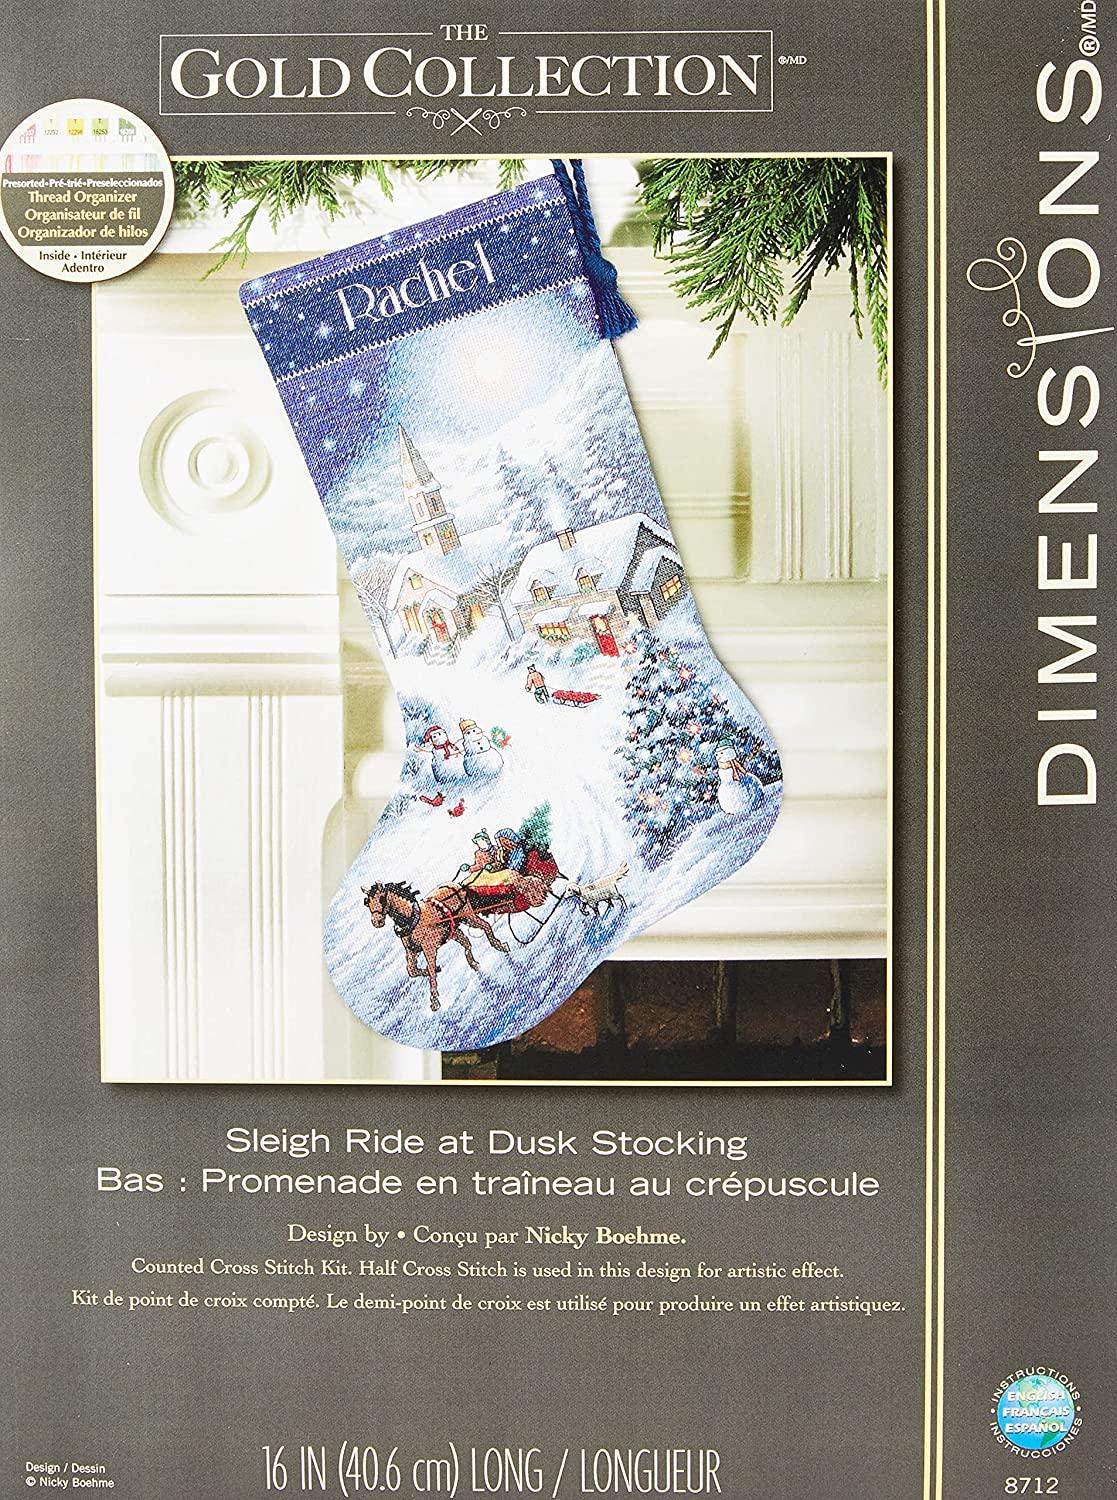 SLEIGH RIDE AT DUSK STOKING, Counted Cross Stitch Gold Kit, 16 count dove grey cotton Aida, 41 cm long, DIMENSIONS (08712) - Leo Hobby